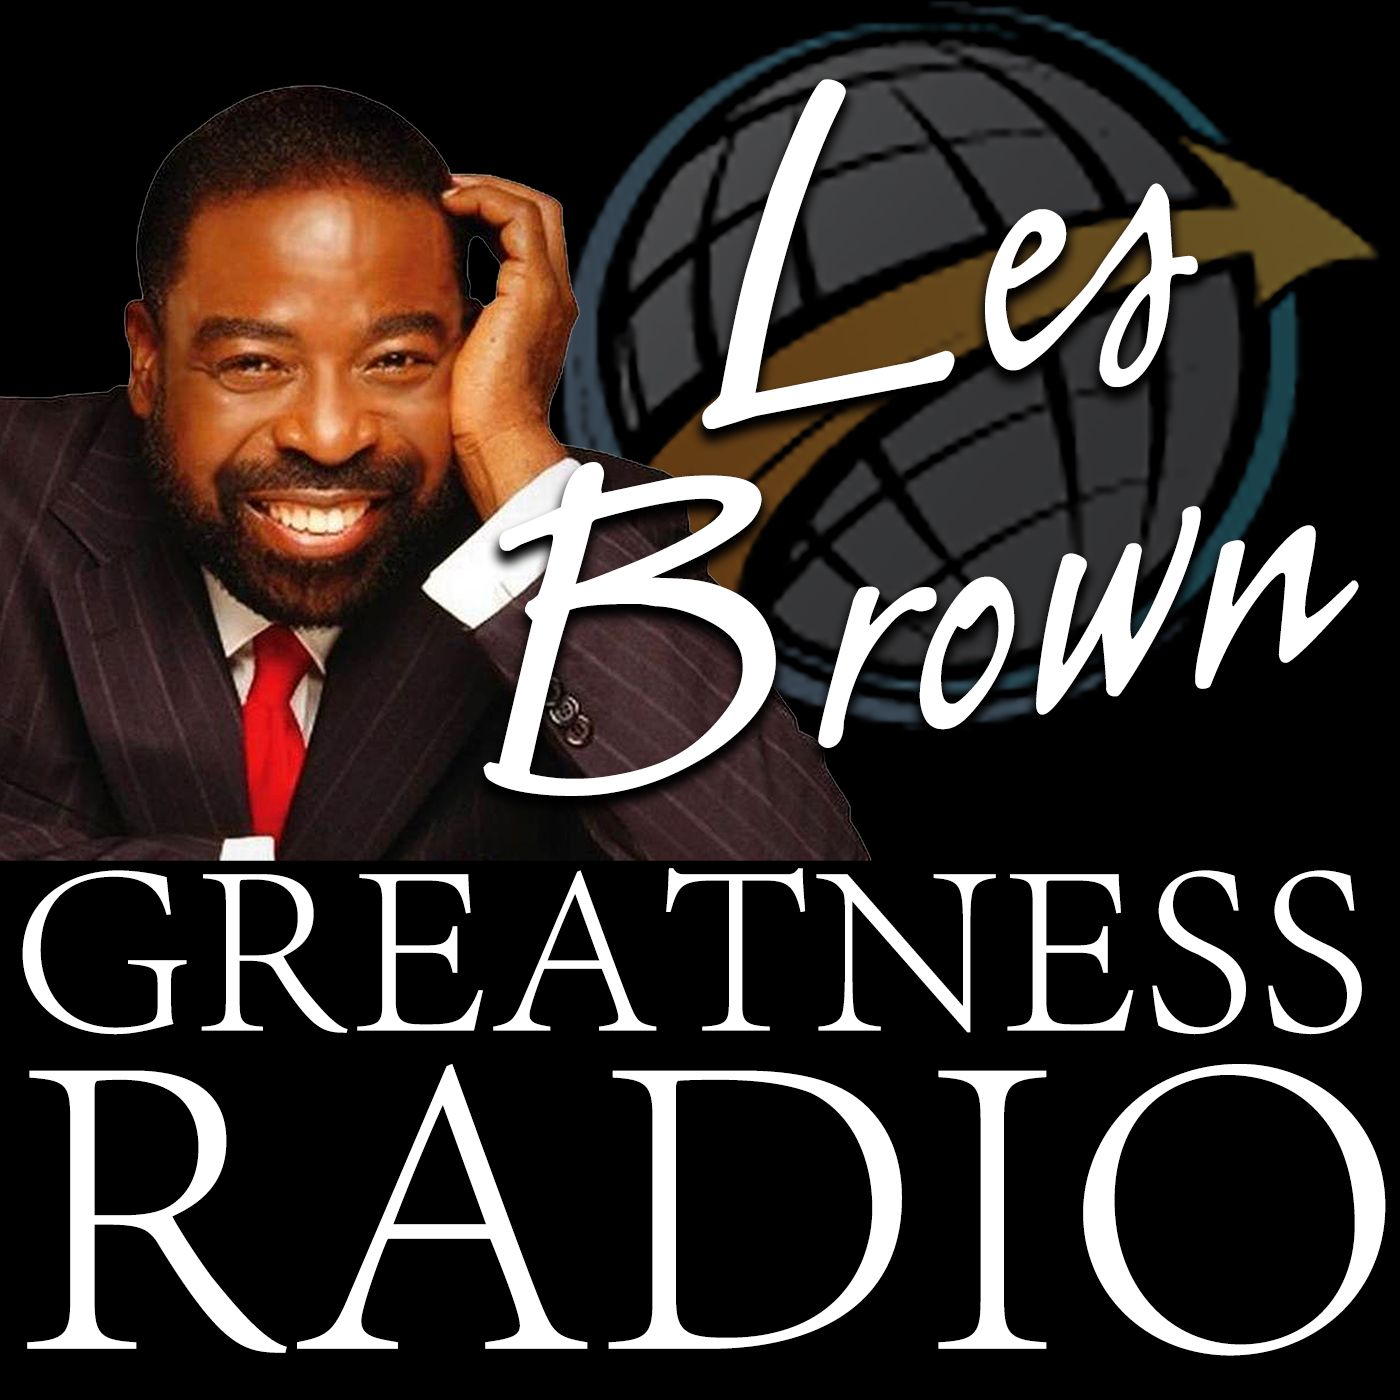 Les Brown Greatness Radio Society Podcast Podchaser